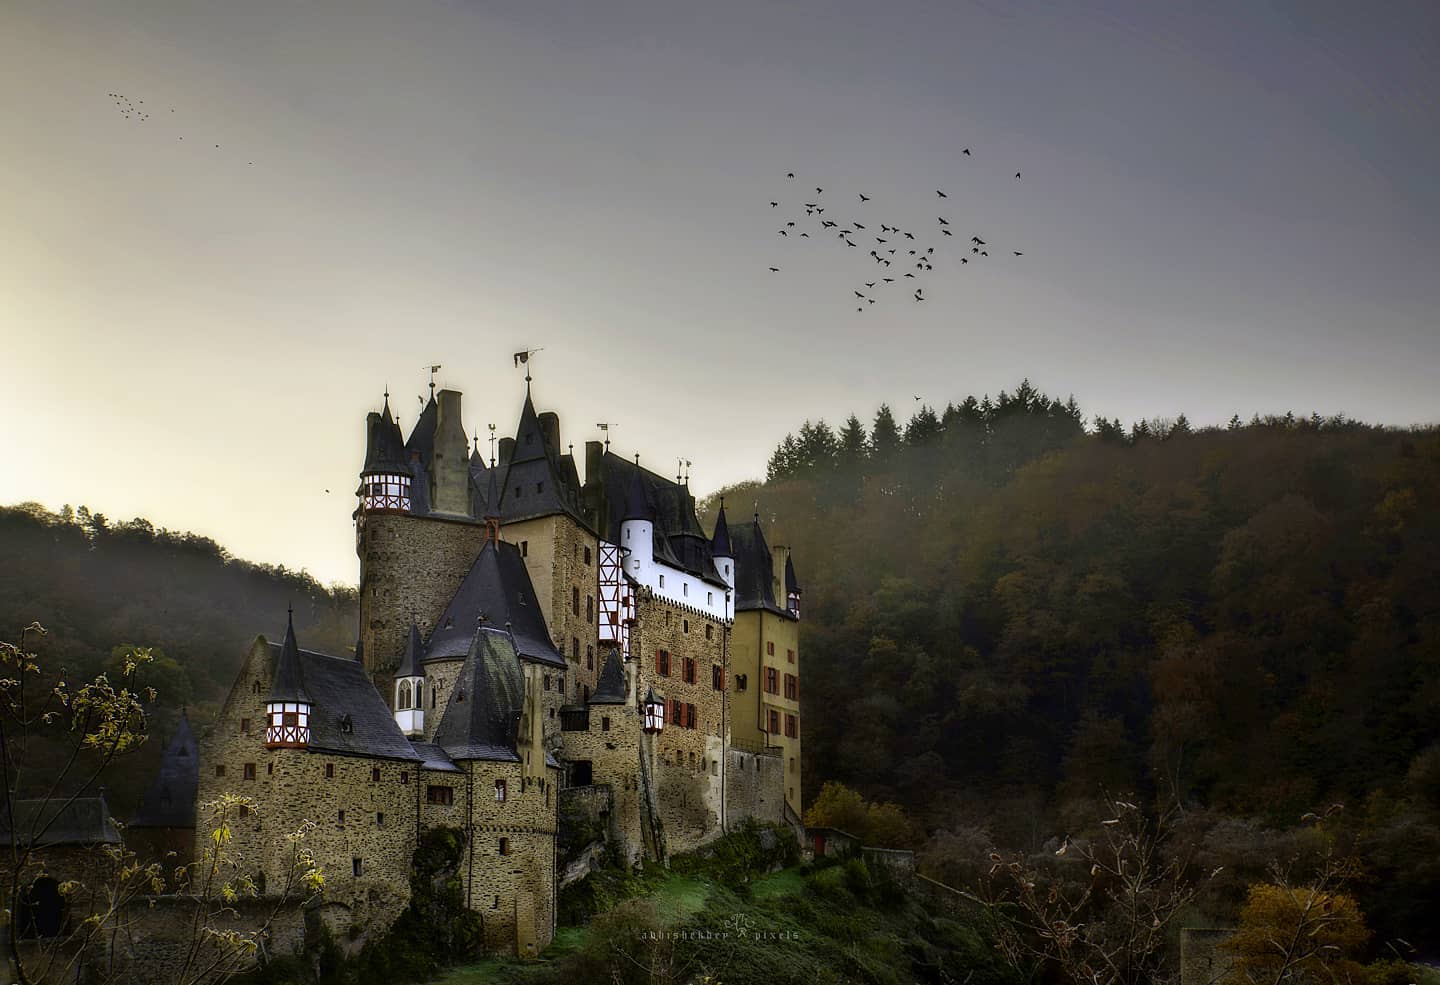 Reverie

Burg Eltz is one of the best hidden gems of Germany. Though it is getting popular nowadays I still feel the castle has a fantastic vibe because of its location and archaic architecture. The castle is in possession of the Eltz family for more than 800 years.

#abhishekdeypixels 
#visitgermany 
#nikondach 
#passionpassport 
#OTHallofFrame 
#outlooktraveller 
#PWGPOV
#photowalkglobal 
#ourfotoworld 
#YourshotPhotographer 
#planetearth
#in_Germany 
#dslrofficial 
#neverstopexploring 
#morning 
#fantasy 
#instagood 
#deutschland 
#burgeltz 
#lonelyplanet 
#tripotocommunity 
#tlpicks 
#exploretocreate 
#eyesopentalent 
#CreateYourLight
#avisualdiaryofficial